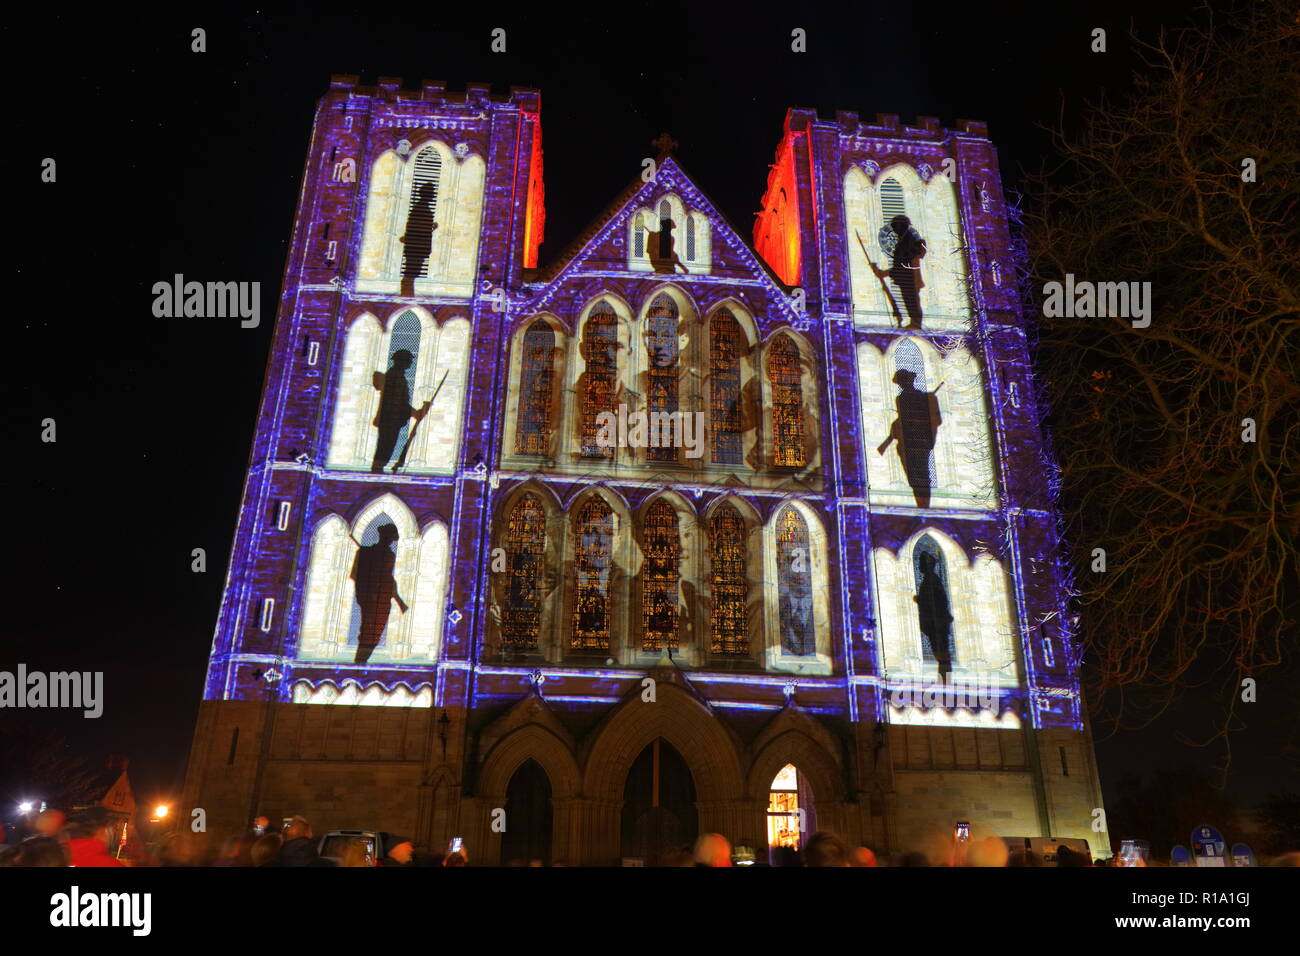 Ripon, North Yorkshire,10th November 2018. Ripon Cathedral lit up by animated projection, which shows photos from WW1 and lists of men who lost their lives during the war. Credit: Yorkshire Pics/Alamy Live News Stock Photo